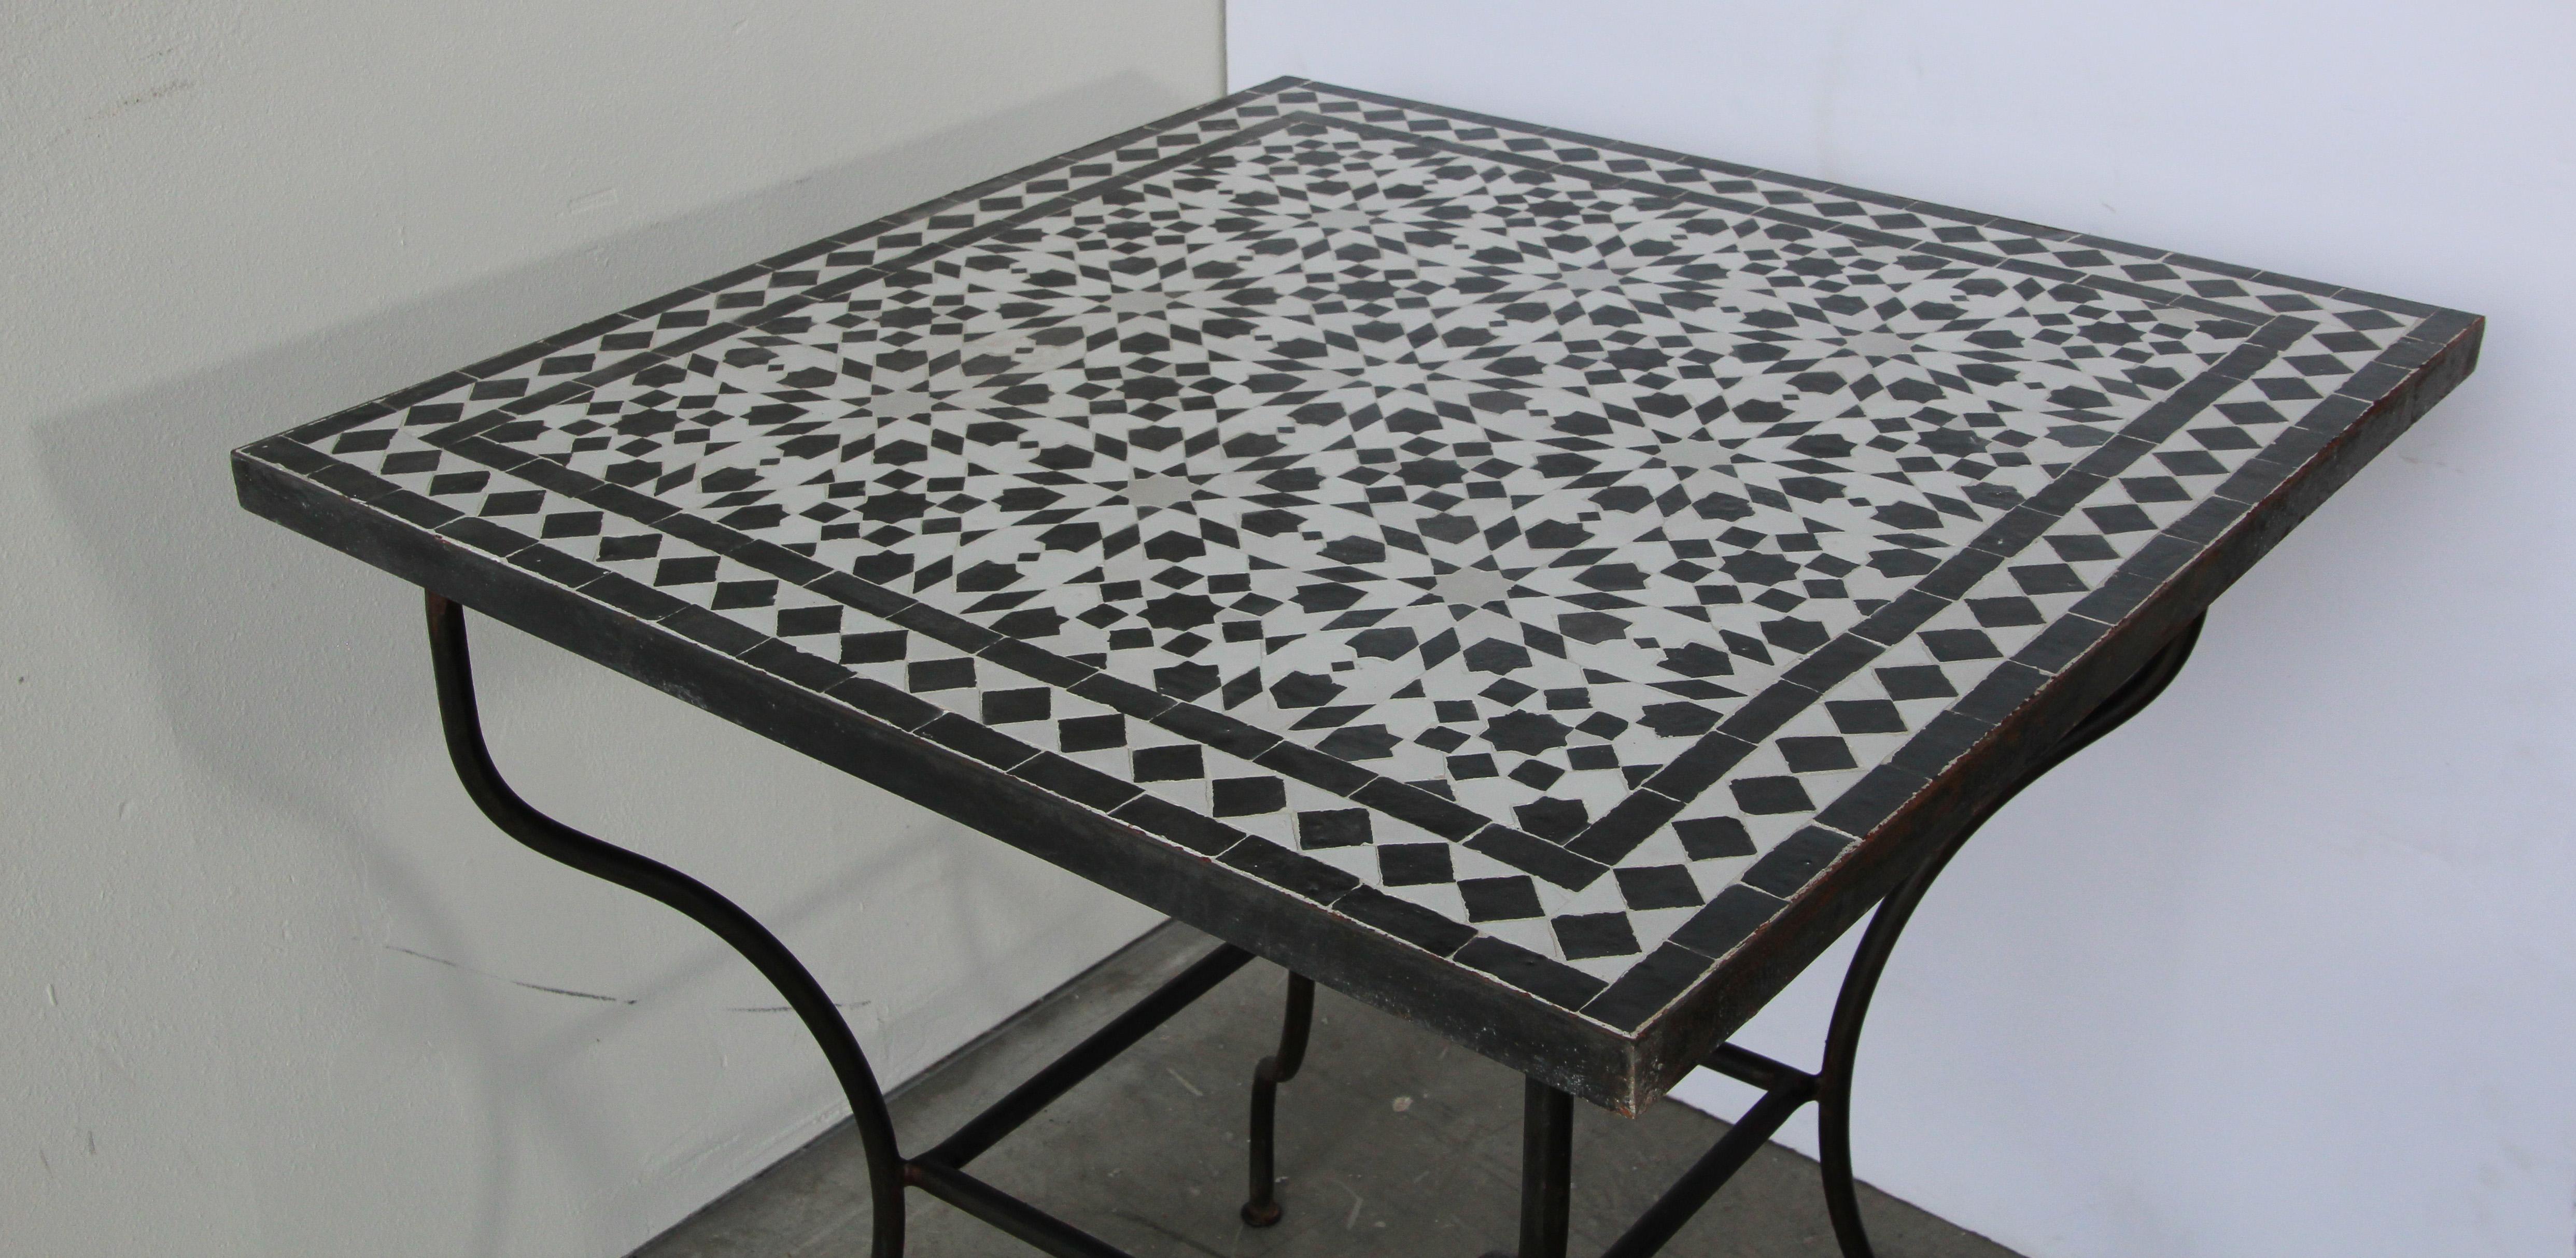 Moroccan Fez Mosaic Table in Black and White Tiles For Sale 4